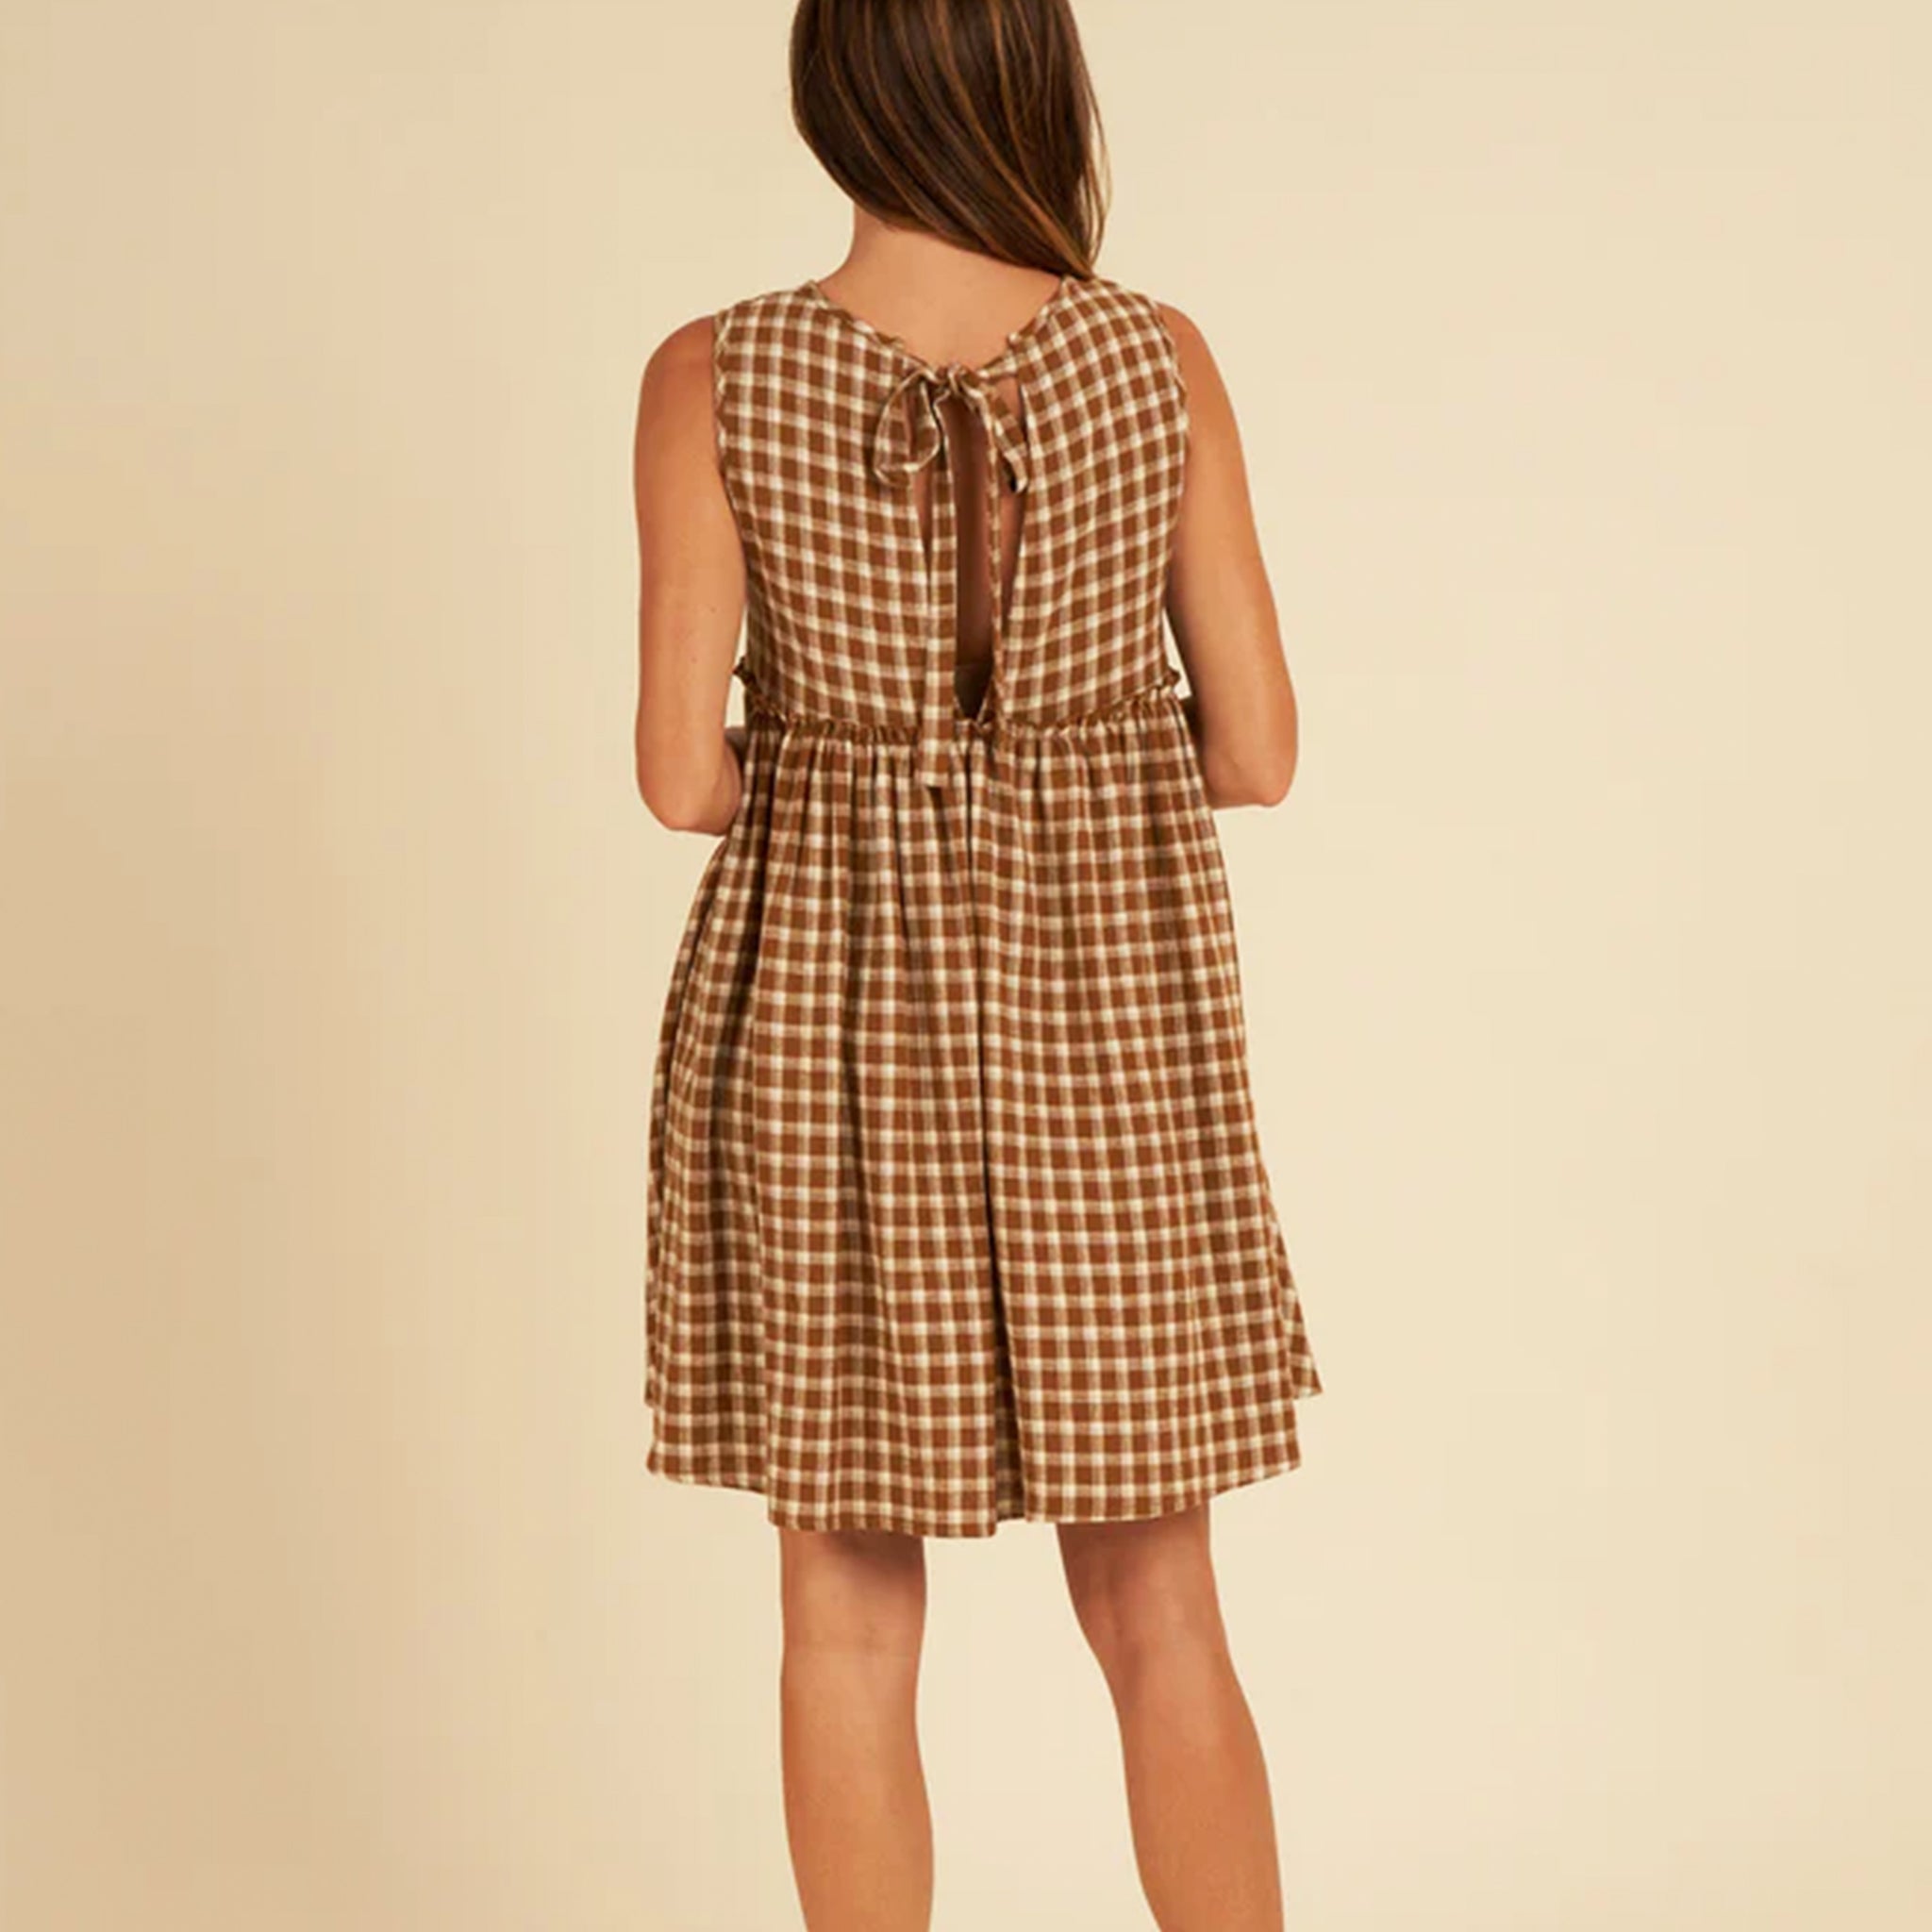 On a tan background is a model wearing a brown and tan plaid babydoll dress with a tie detail in the back. 